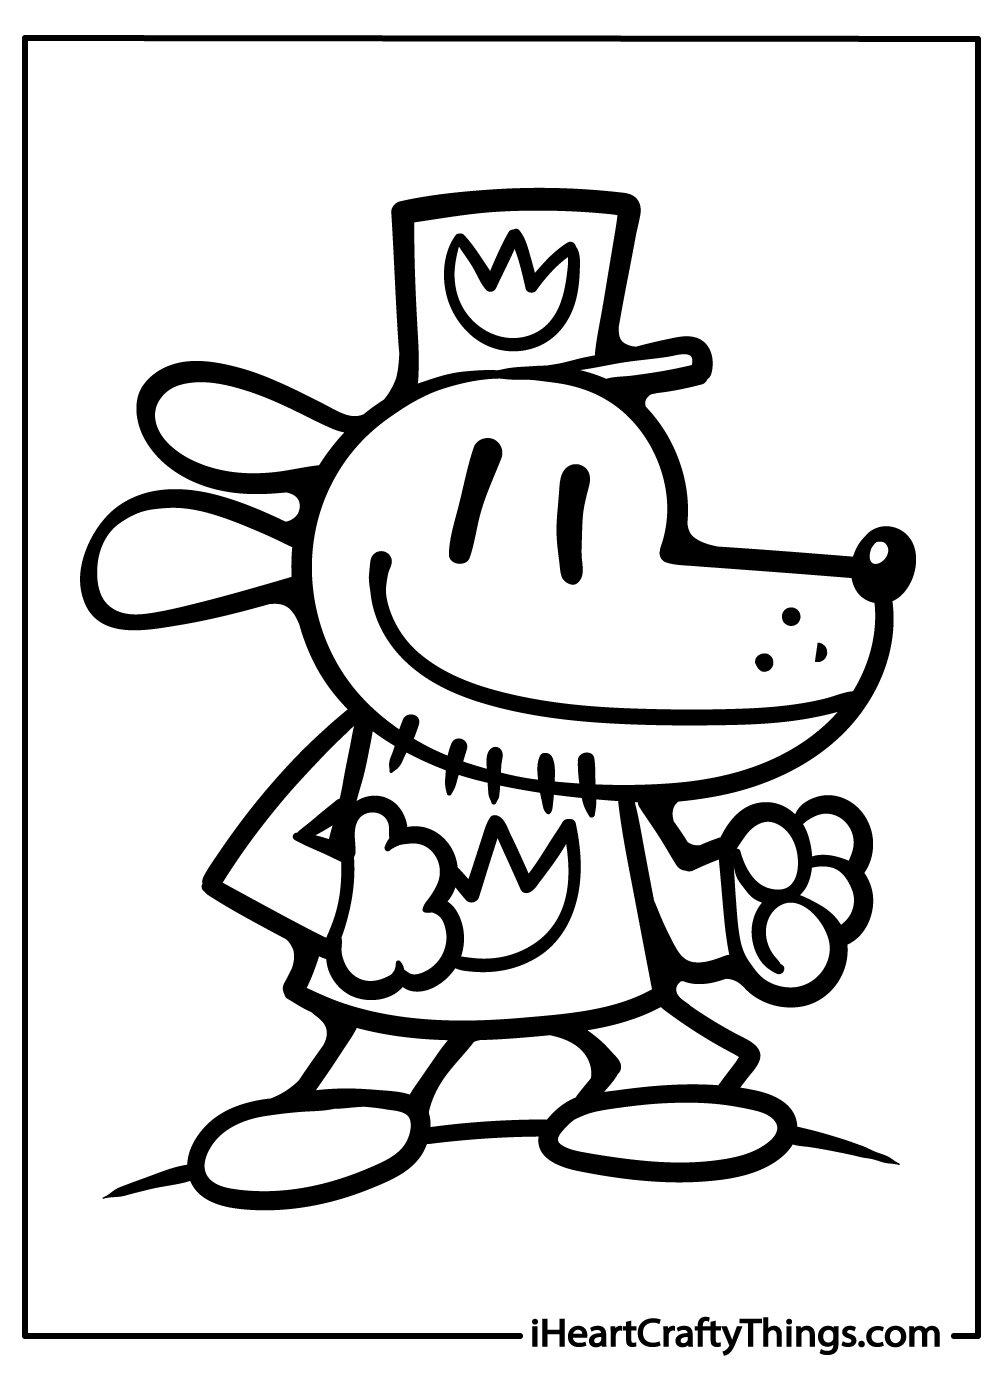 new dog man coloring pages